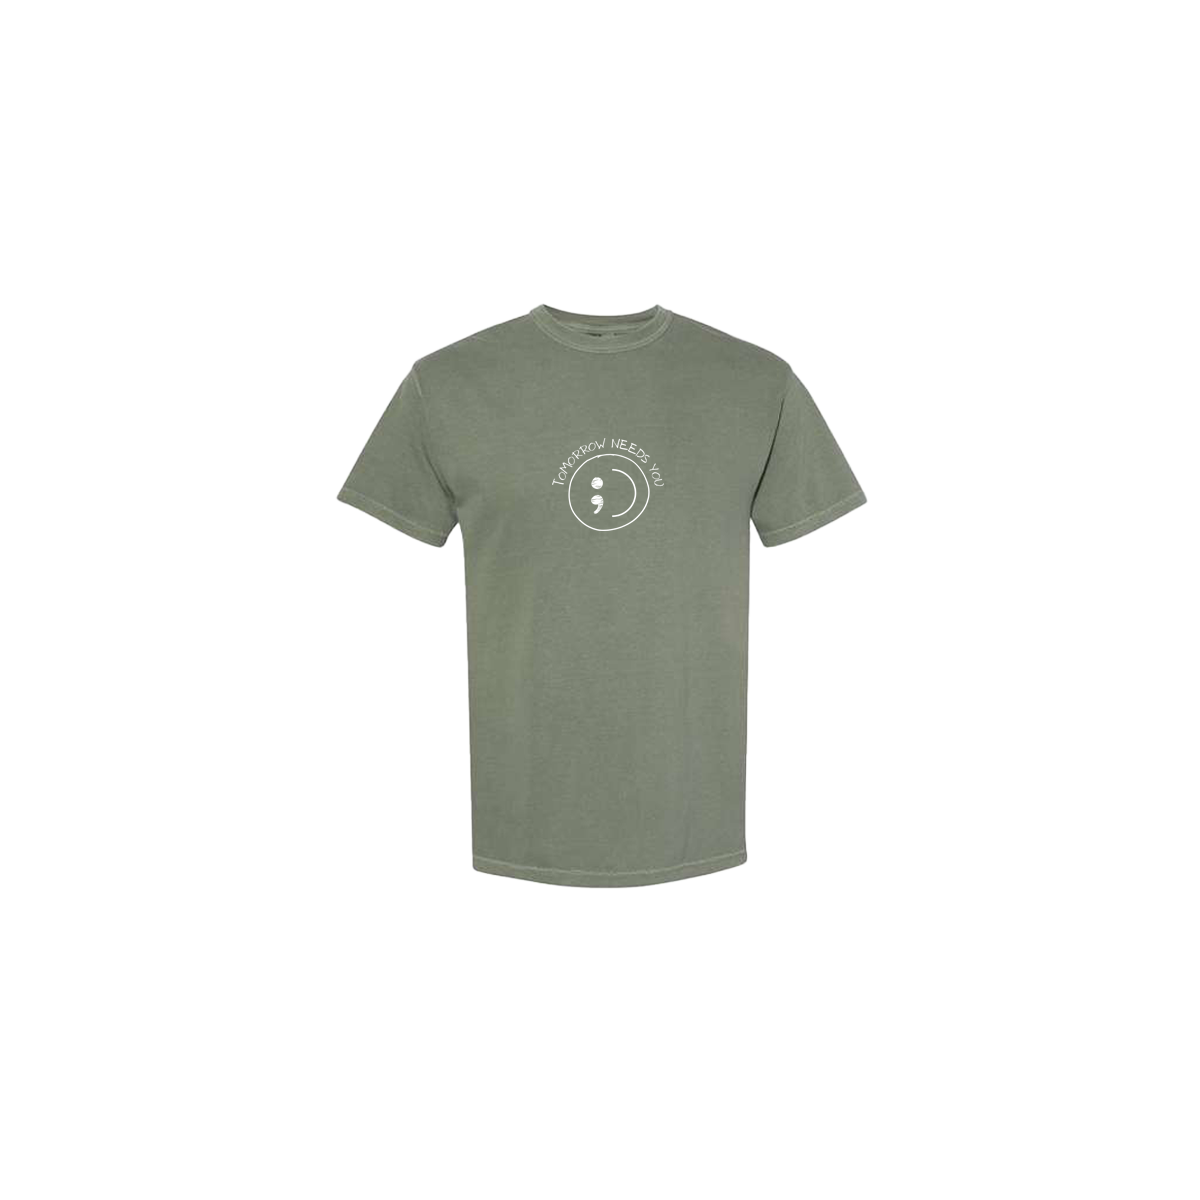 Tomorrow Needs You Embroidered Army Green Tshirt - Mental Health Awareness Clothing